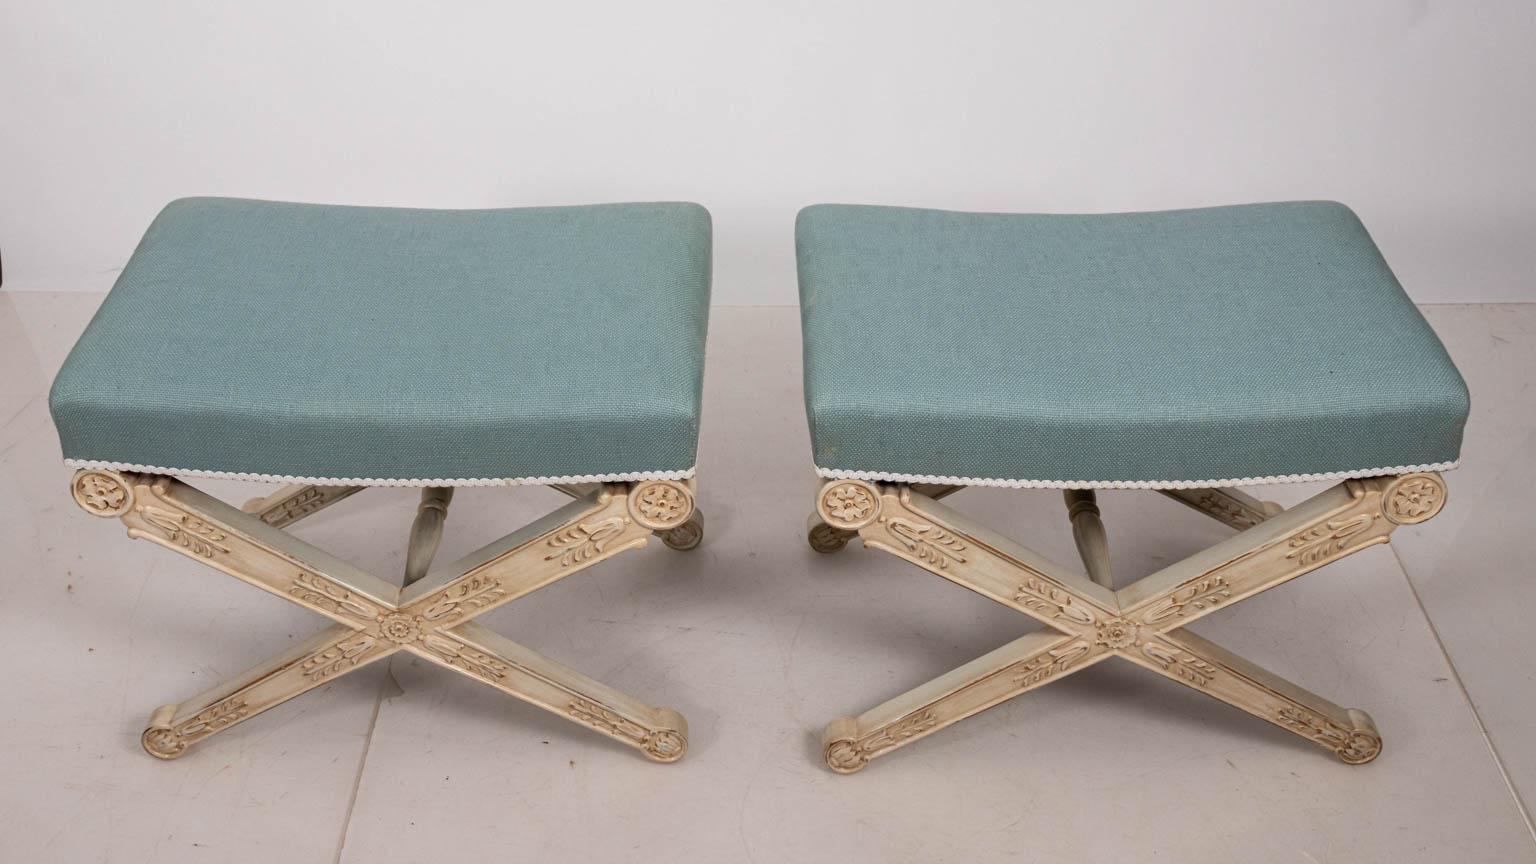 Contemporary pair of Louis XV style benches upholstered in Tiffany blue fabric and white trim. The pieces also feature white painted X-frame bases carved with bell flower motifs. Please note of wear consistent with age including distressed finish